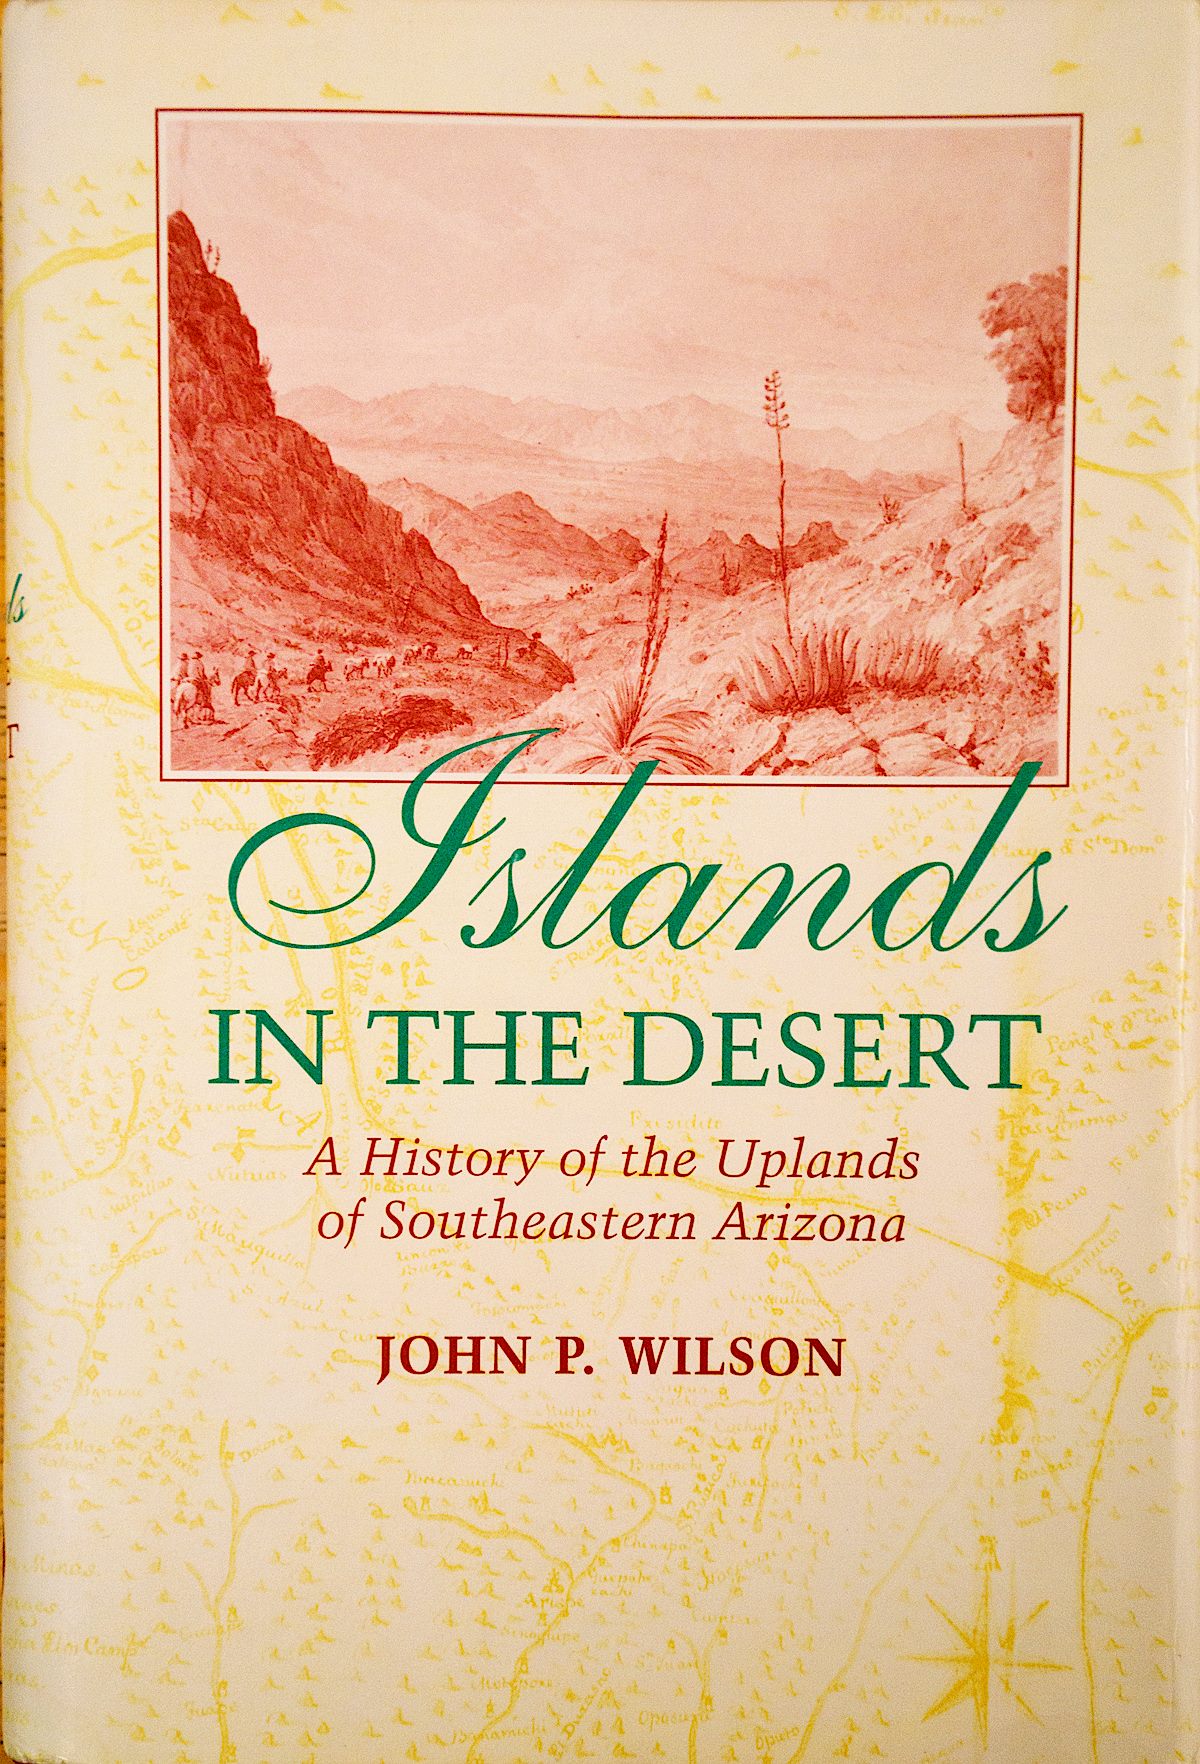 Islands in the Desert: A History of the Uplands of Southeastern Arizona, John P. Wilson. December 2016.